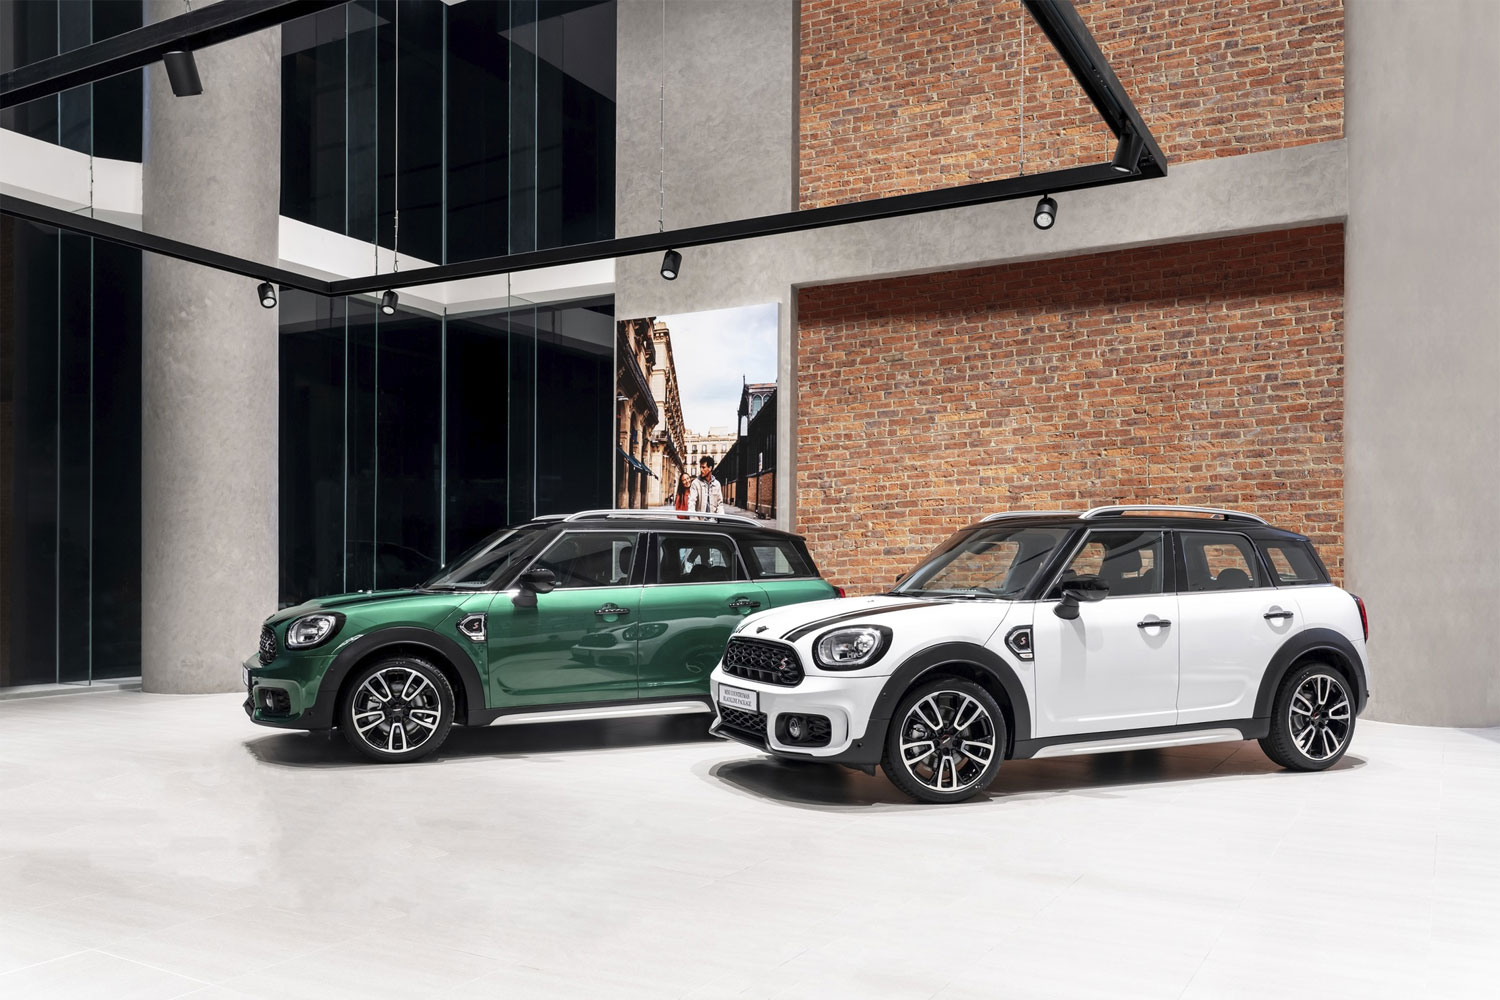 MINI Cooper S Countryman Sports Limited Editions_1